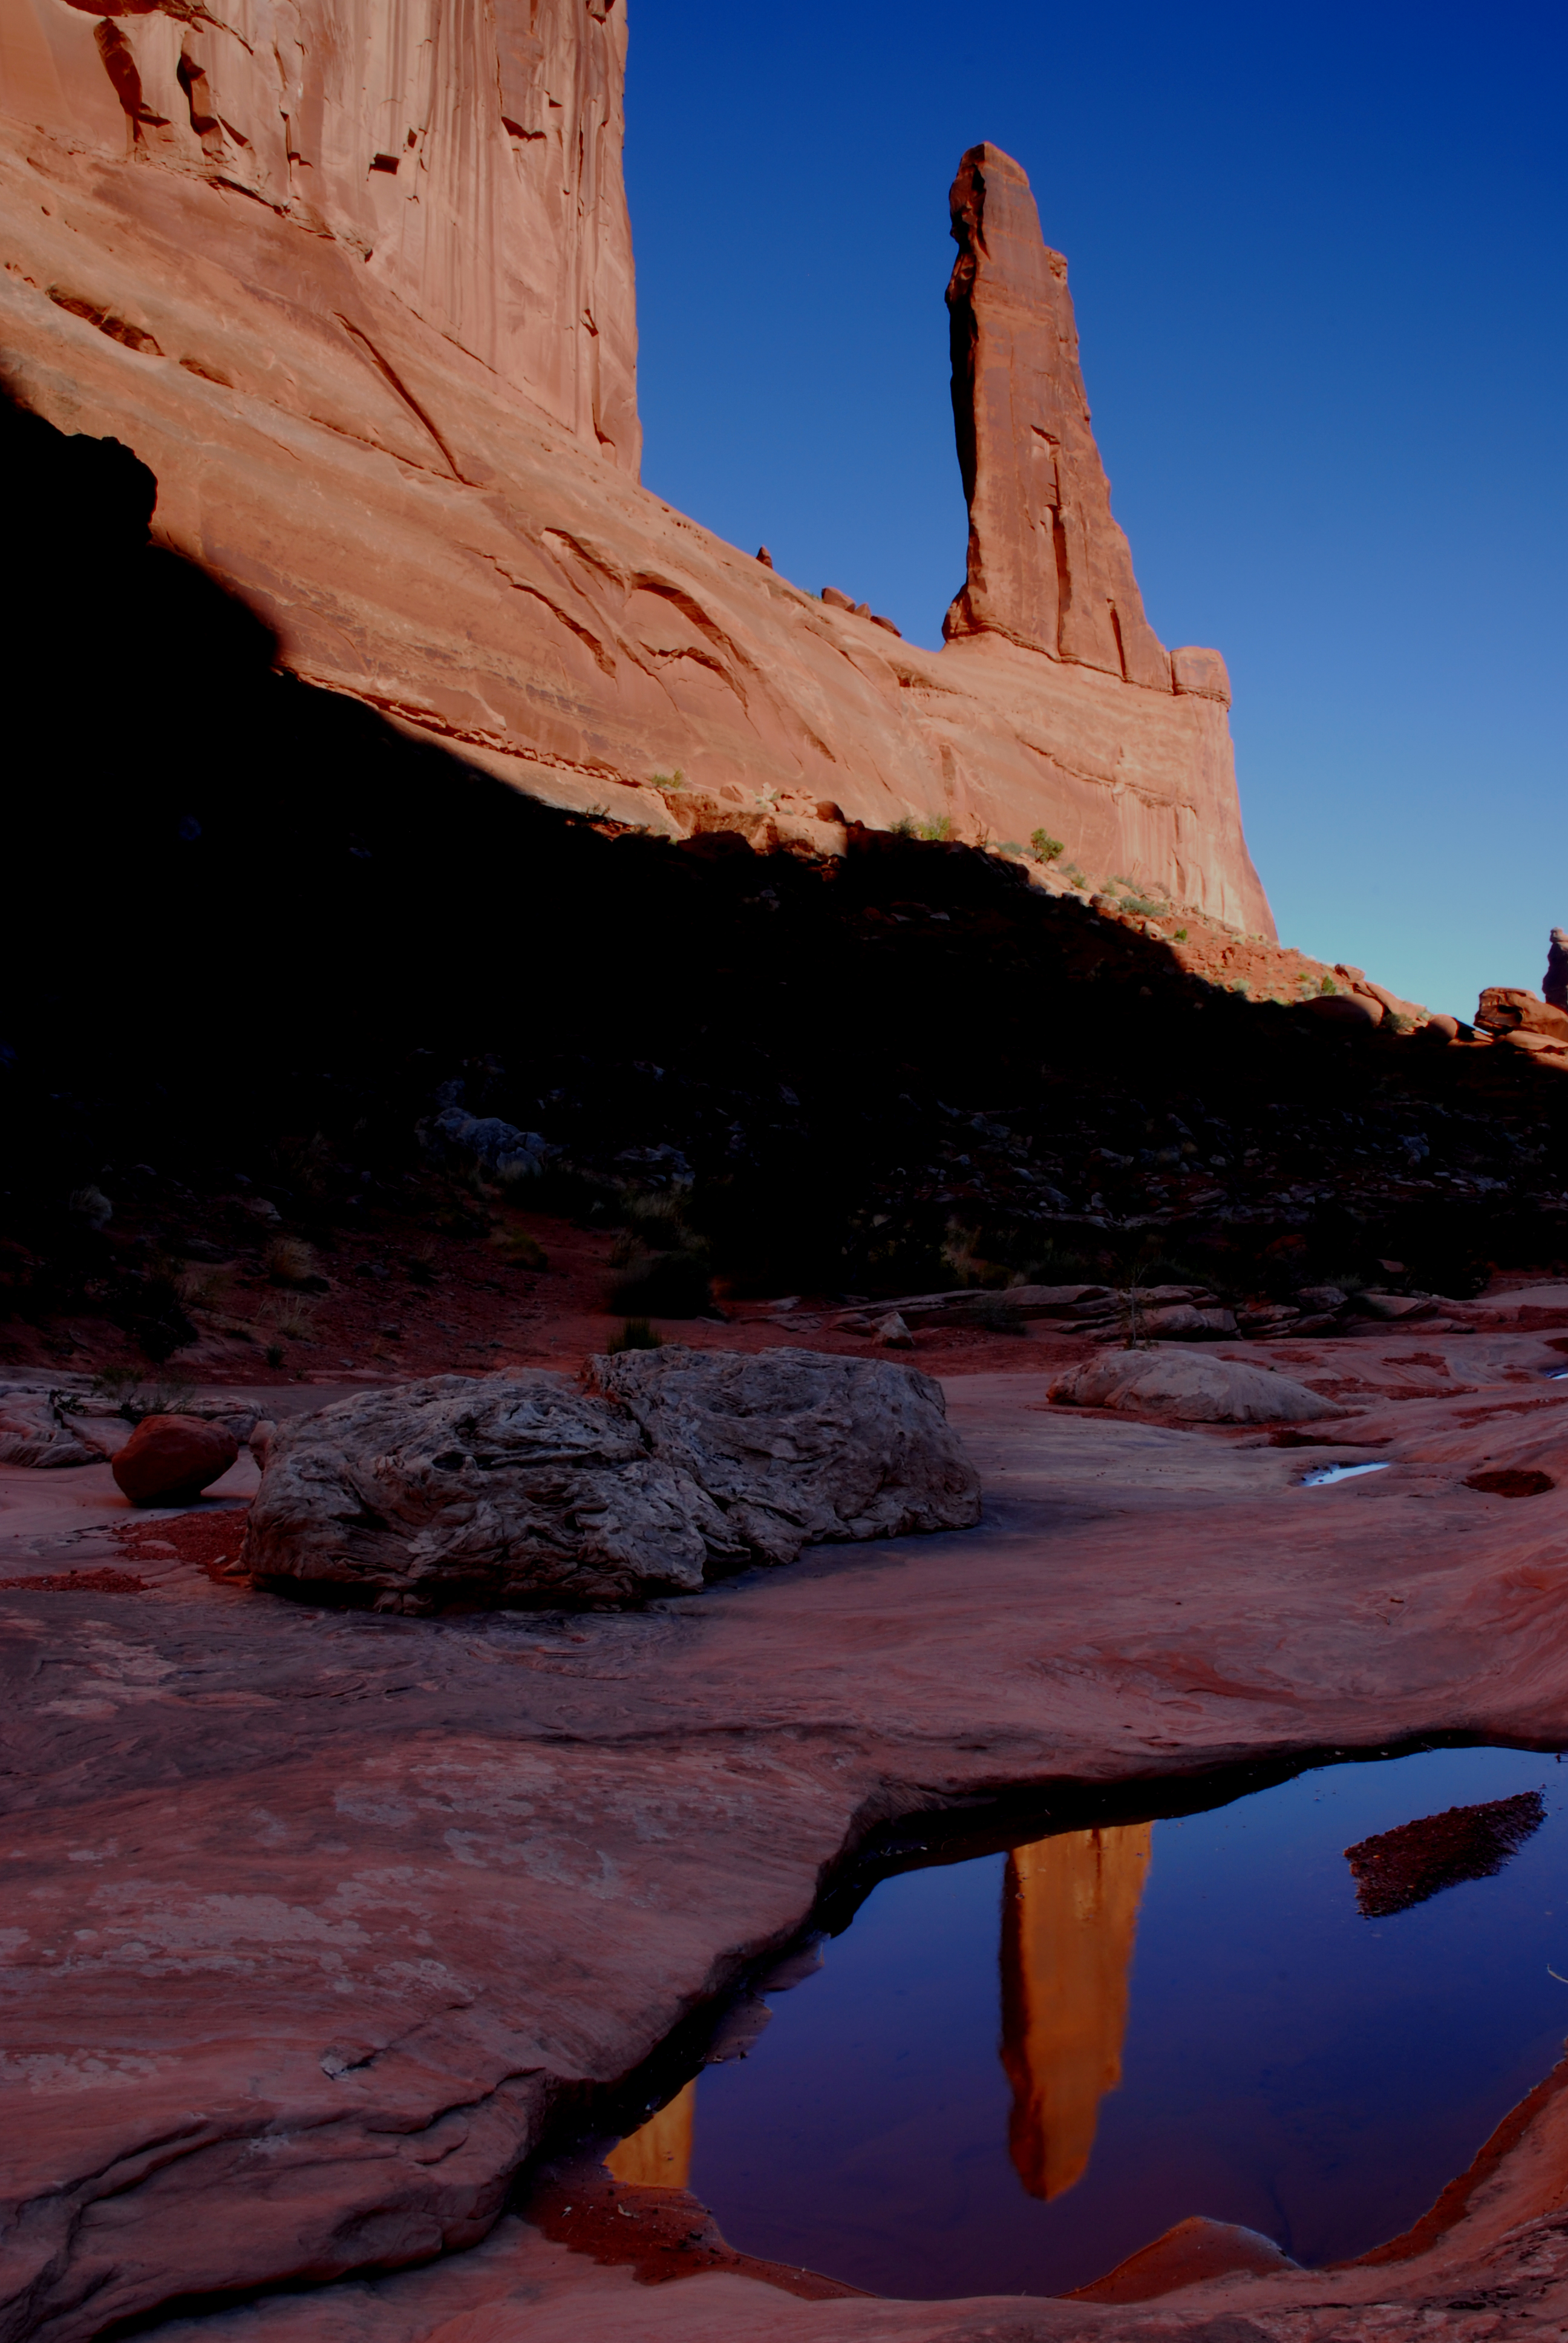 Sandstone formation reflected in rainwater pool - Park Avenue Trail, Arches National Park, Utah